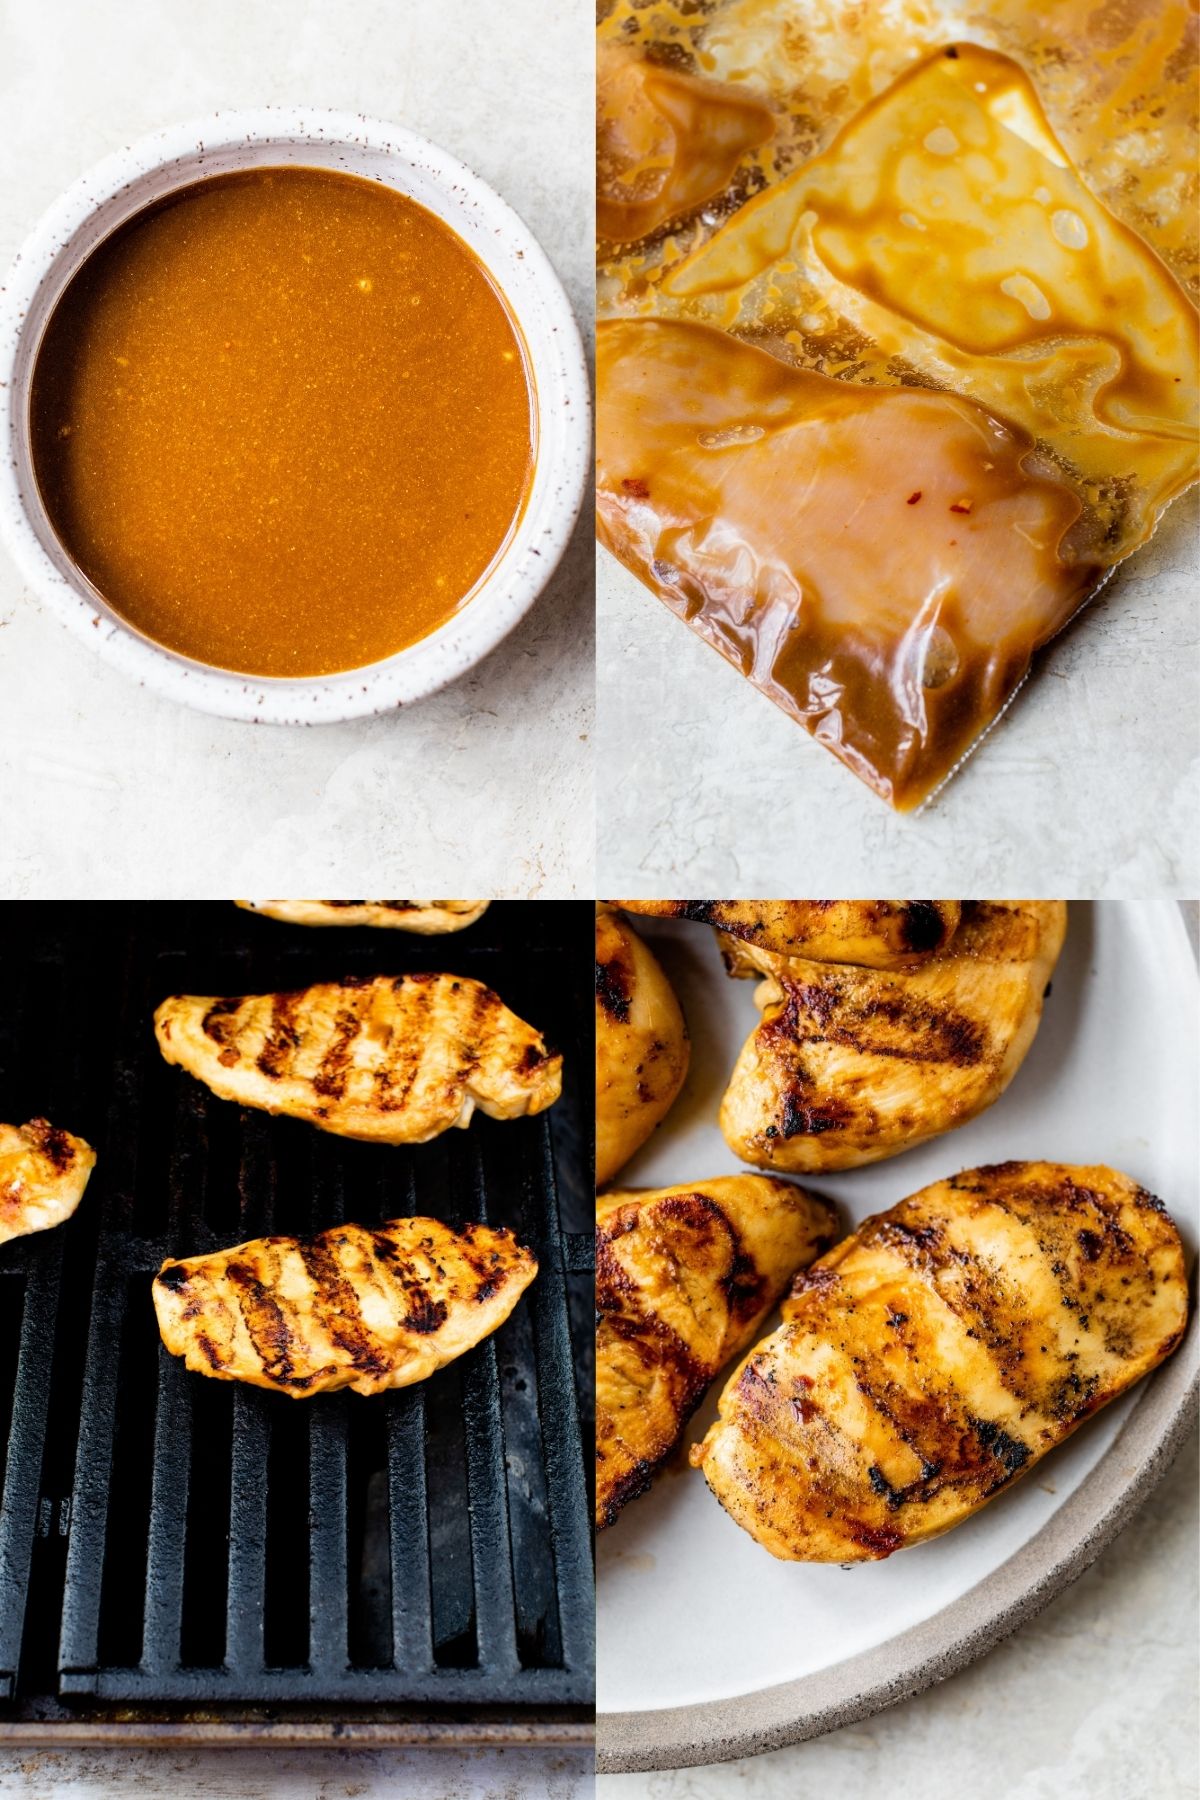 Visual steps for how to marinate and grill chicken.